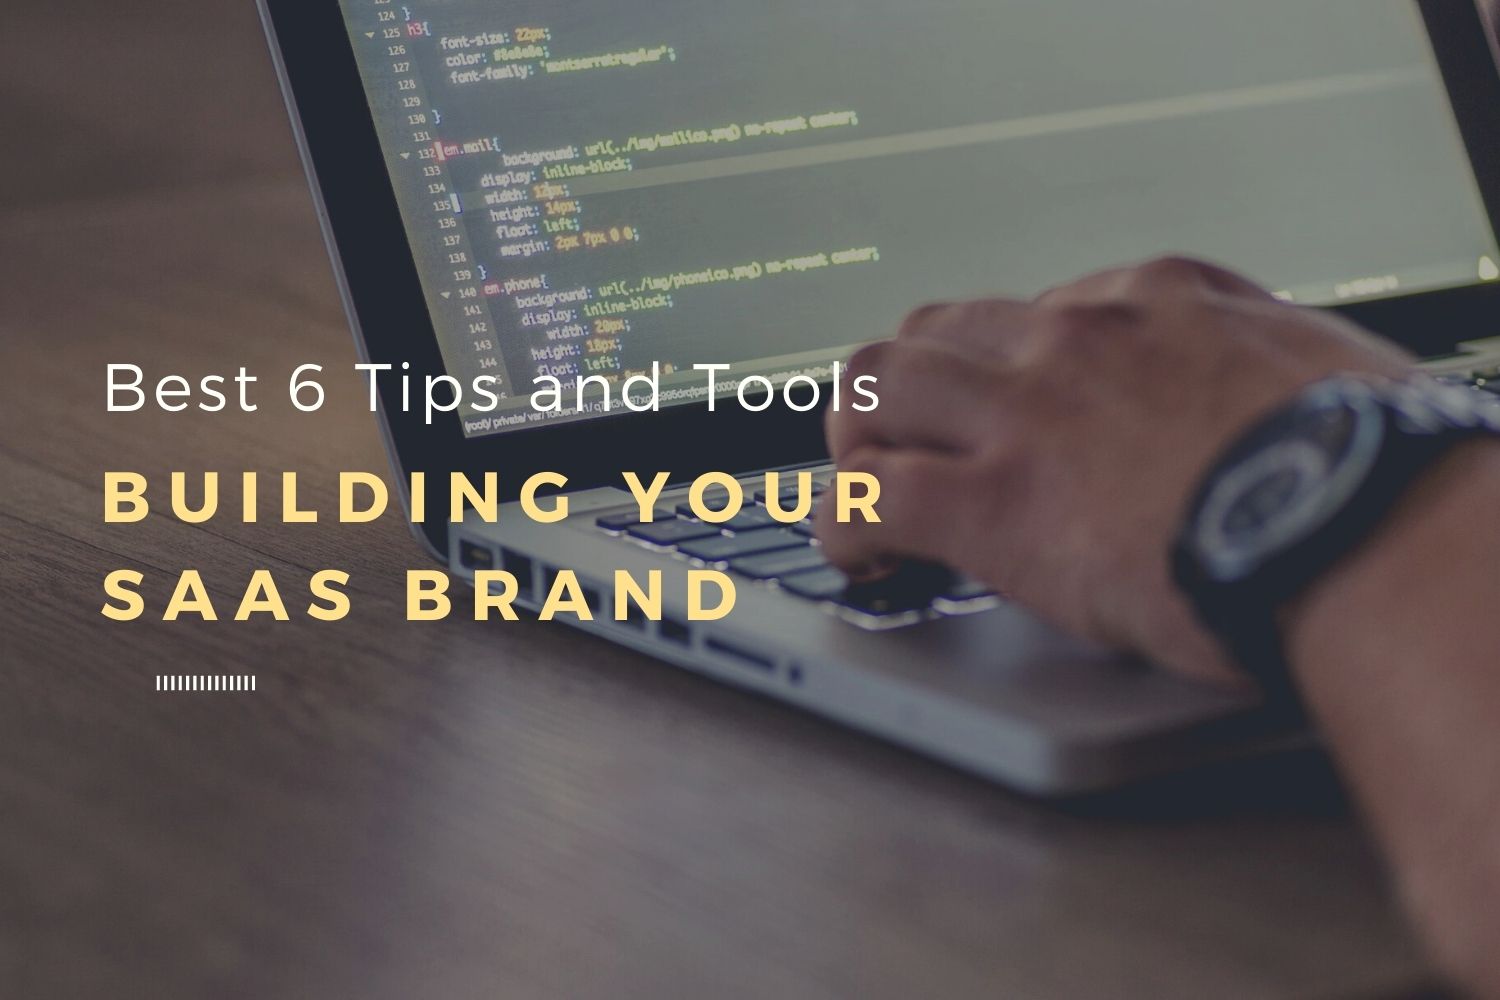 Best 6 Tips and Tools to Use when Building your SaaS Brand